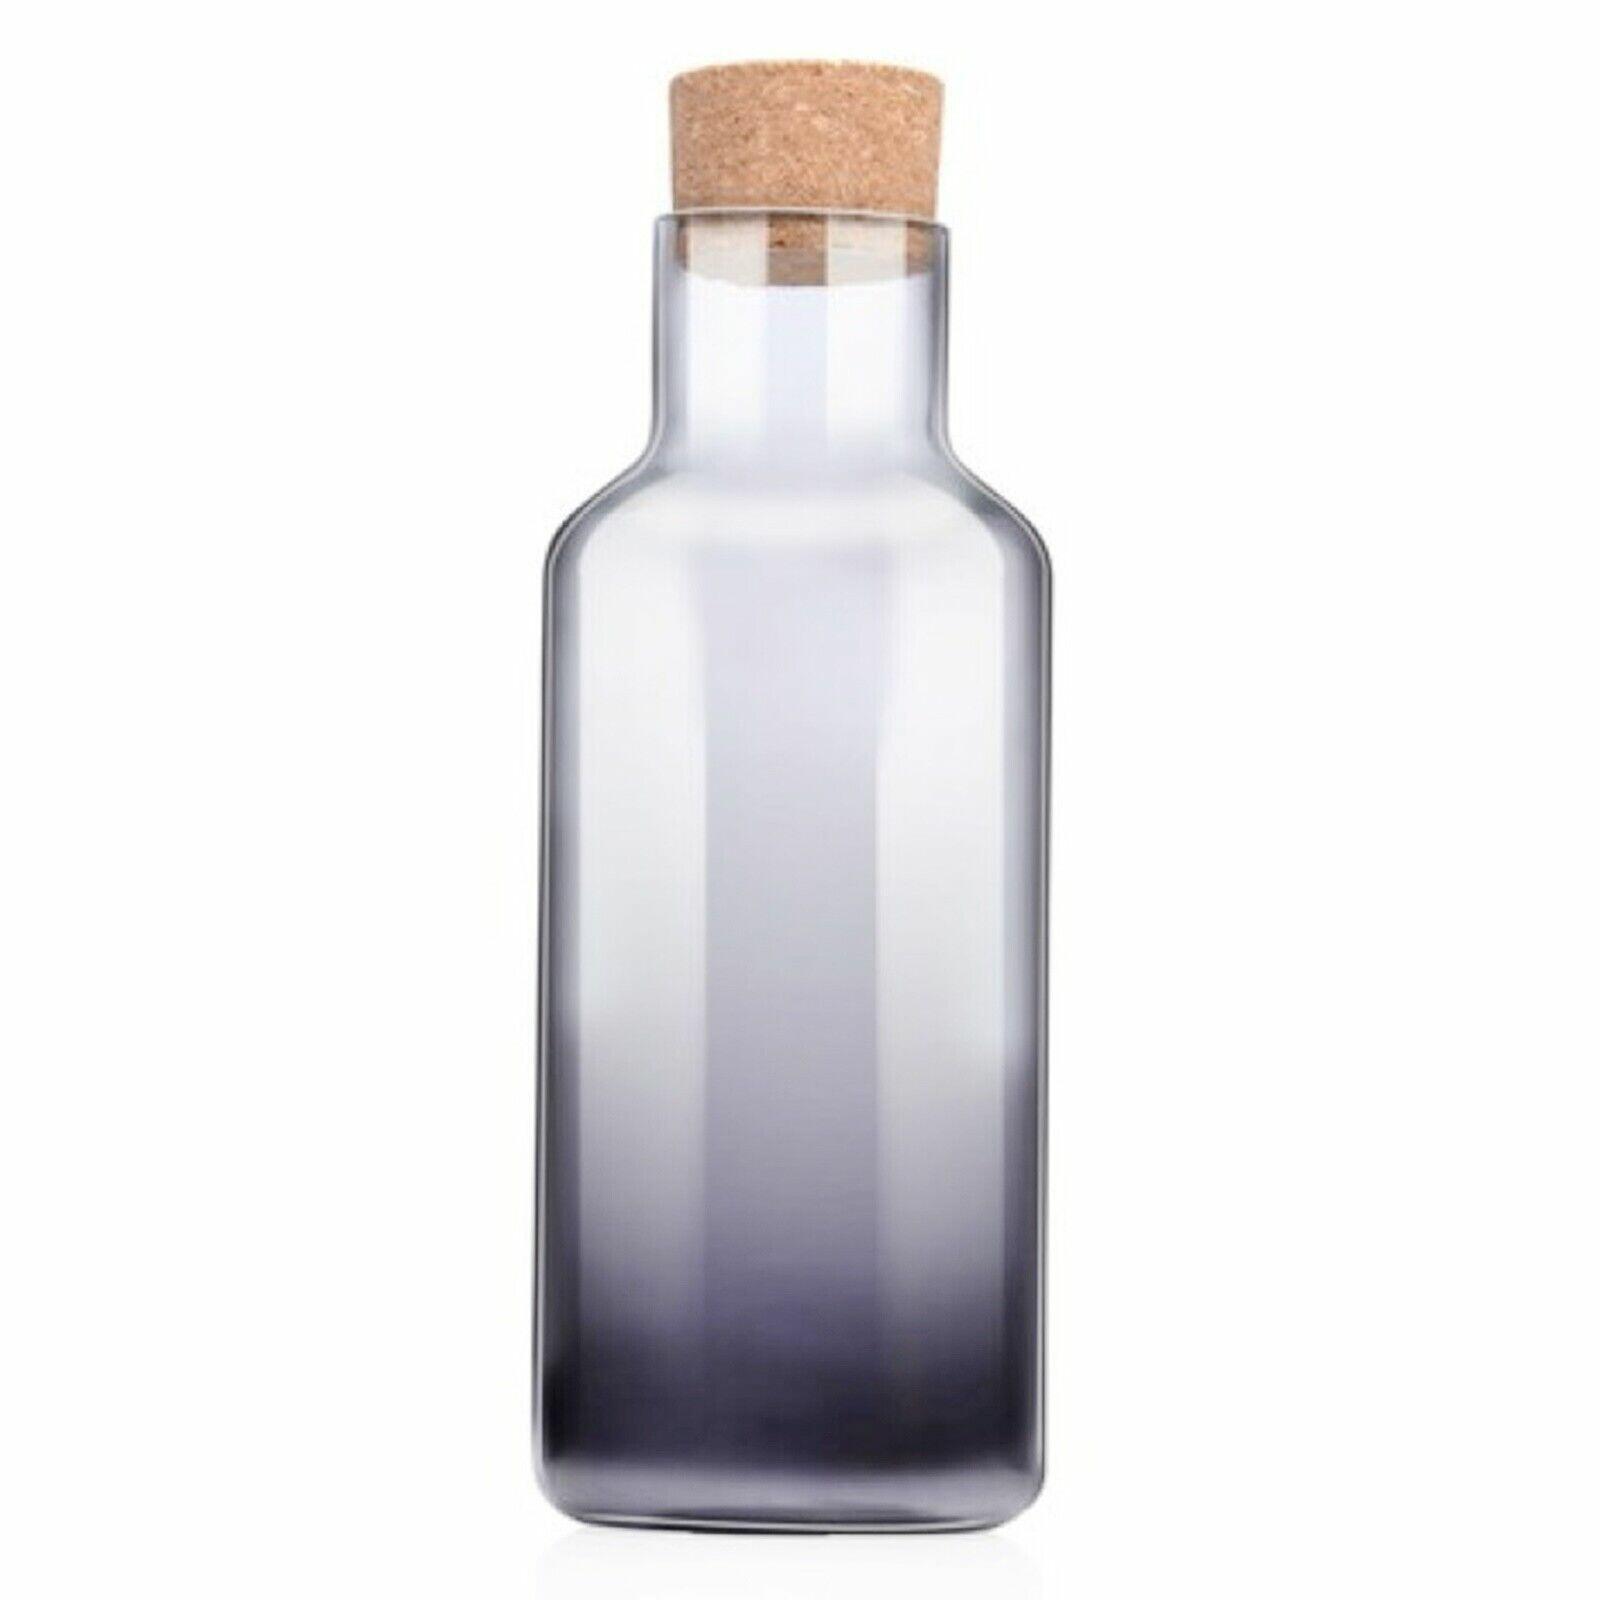 Water Carafe Glass Bottle Cork Lid Water Juice Cocktail Pitcher